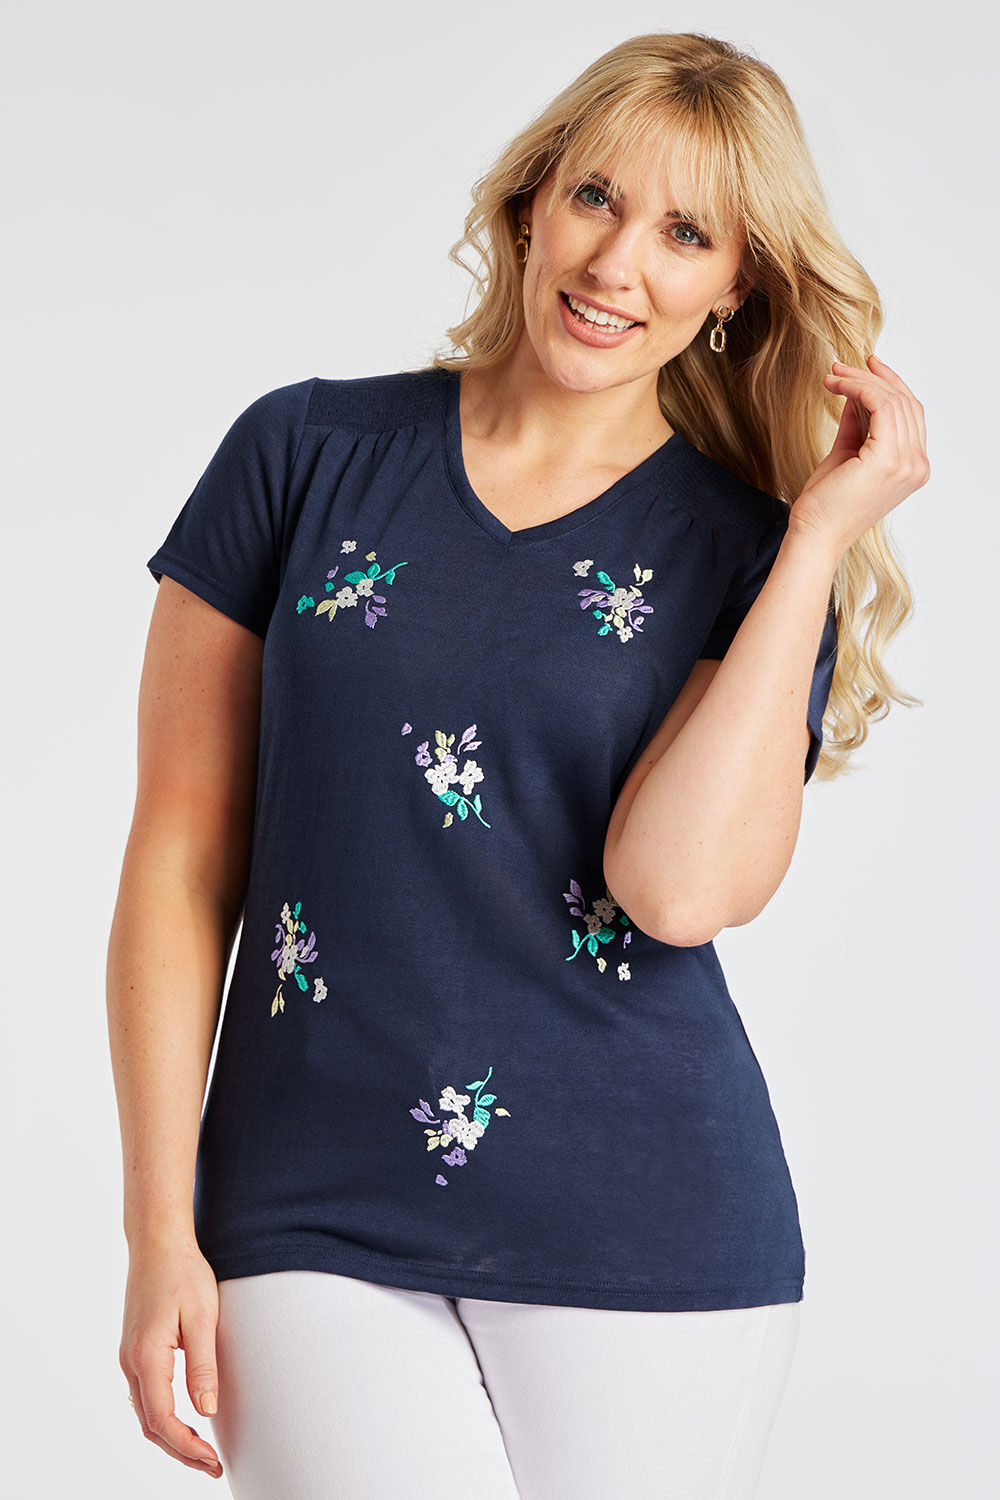 Bonmarche Navy Short Sleeves Embroidered Flower T-Shirt, Size: 16